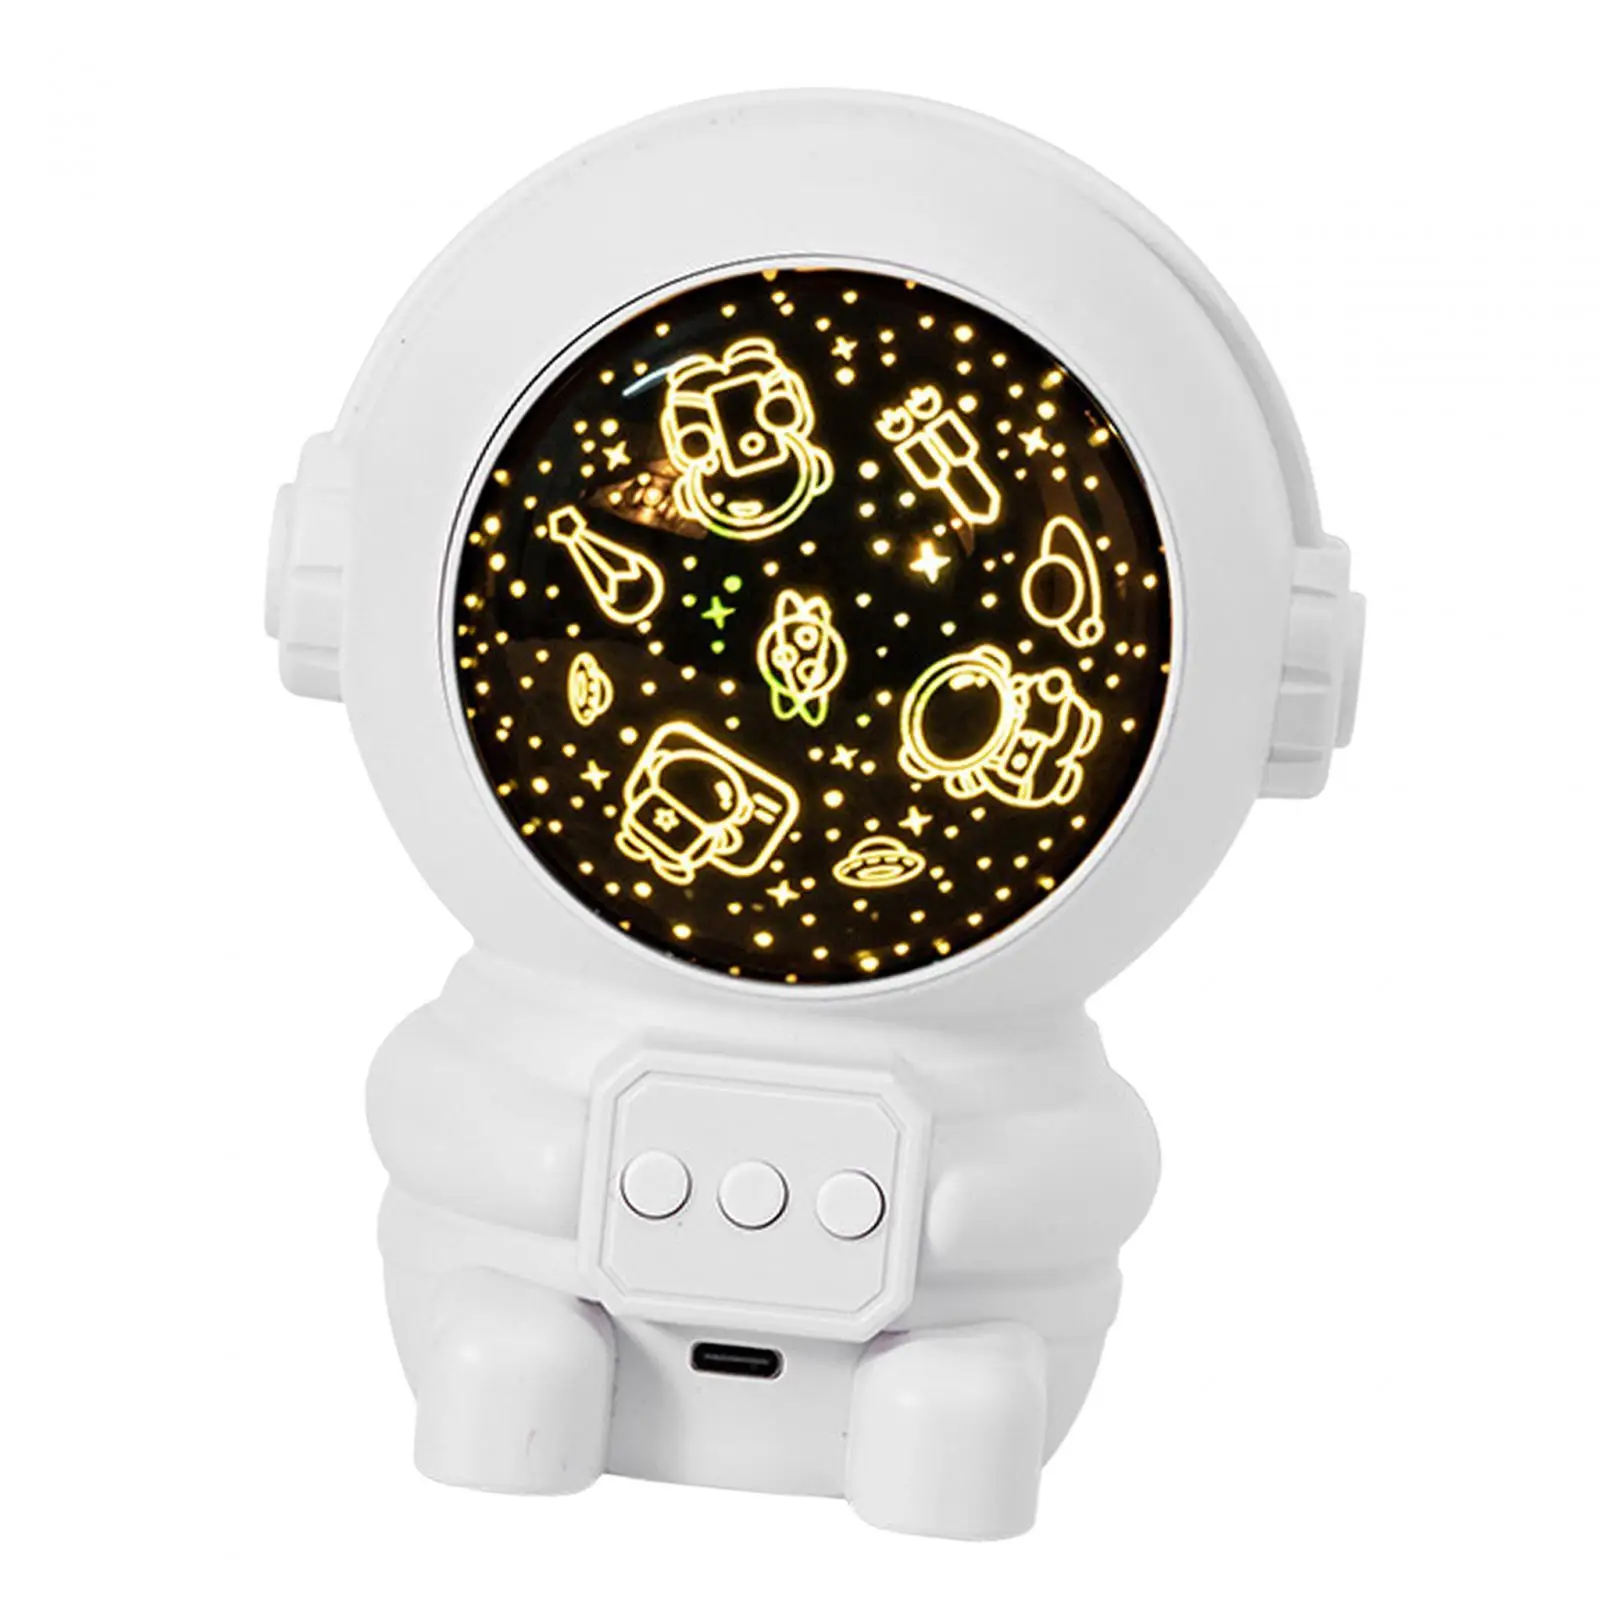 Astronaut Light Projector Decor Star Projector Galaxy Multicolor LED Lamp for Kids Bedroom Baby Toddlers Children Holiday Gift